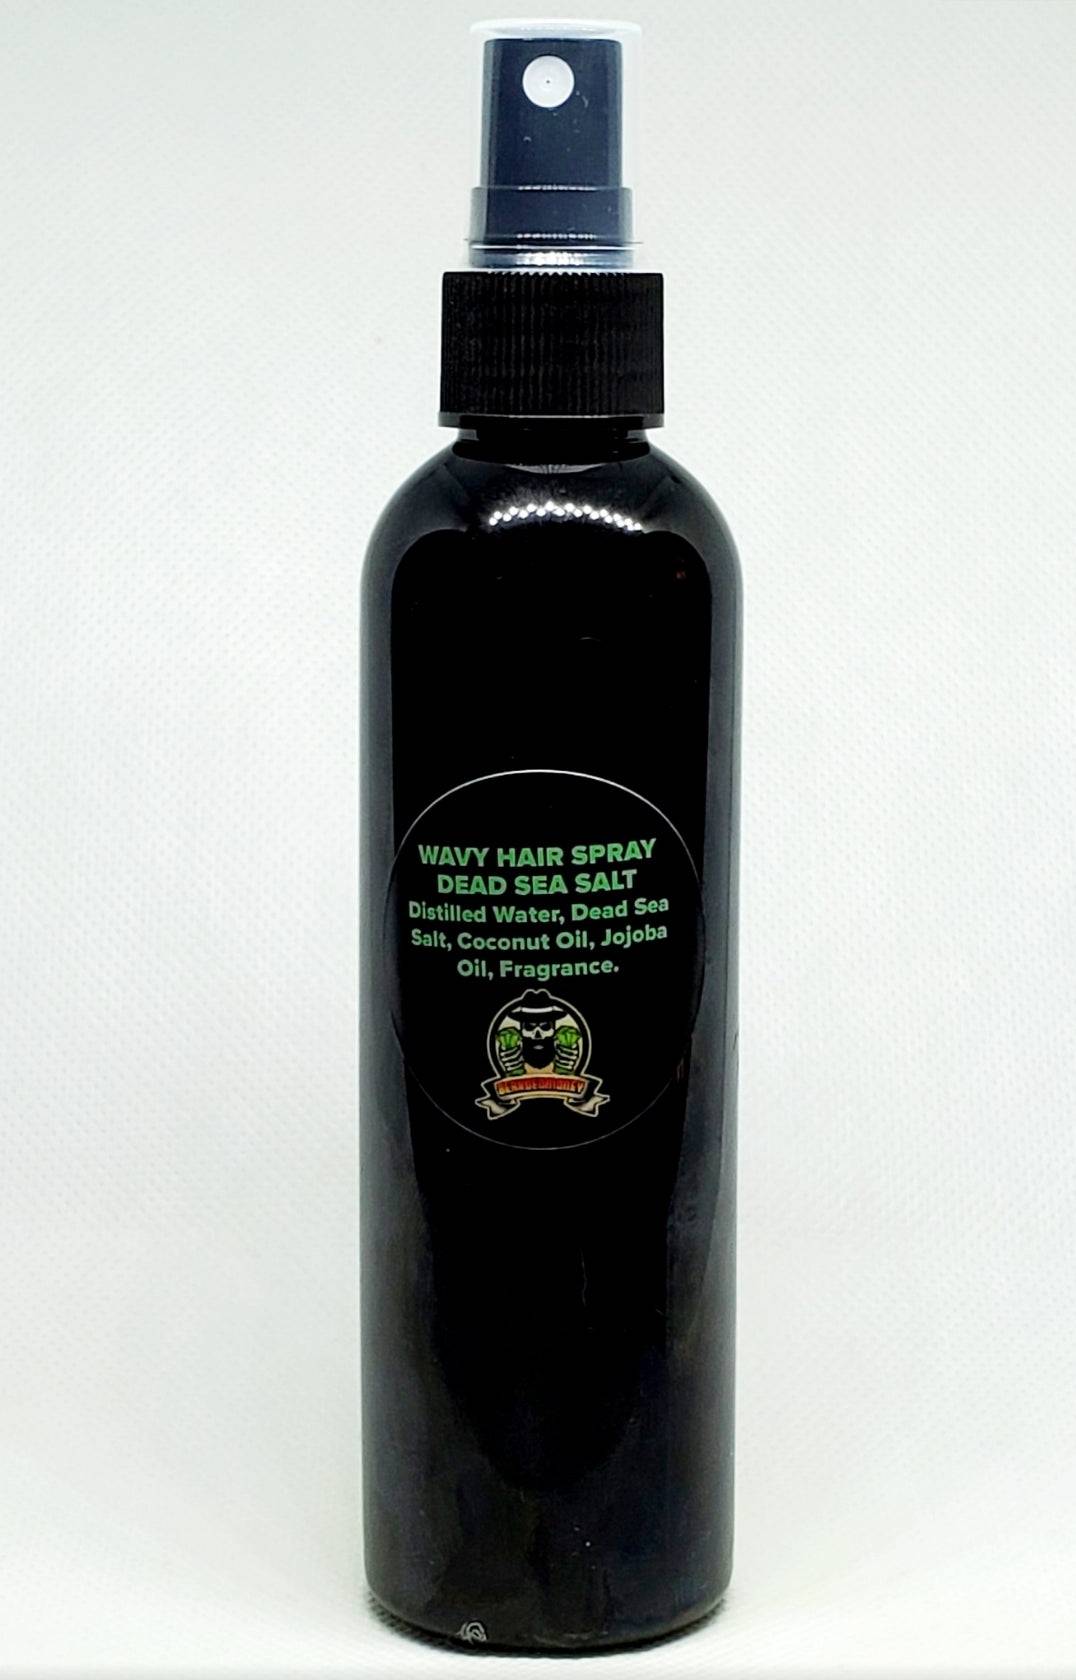 Freedom Wavy Hair Spray has a clean, masculine scent that captures the freshness of aquatic territory. This type is made up of crushed mint leaves, warm brown sugar and the zest of a lemon.